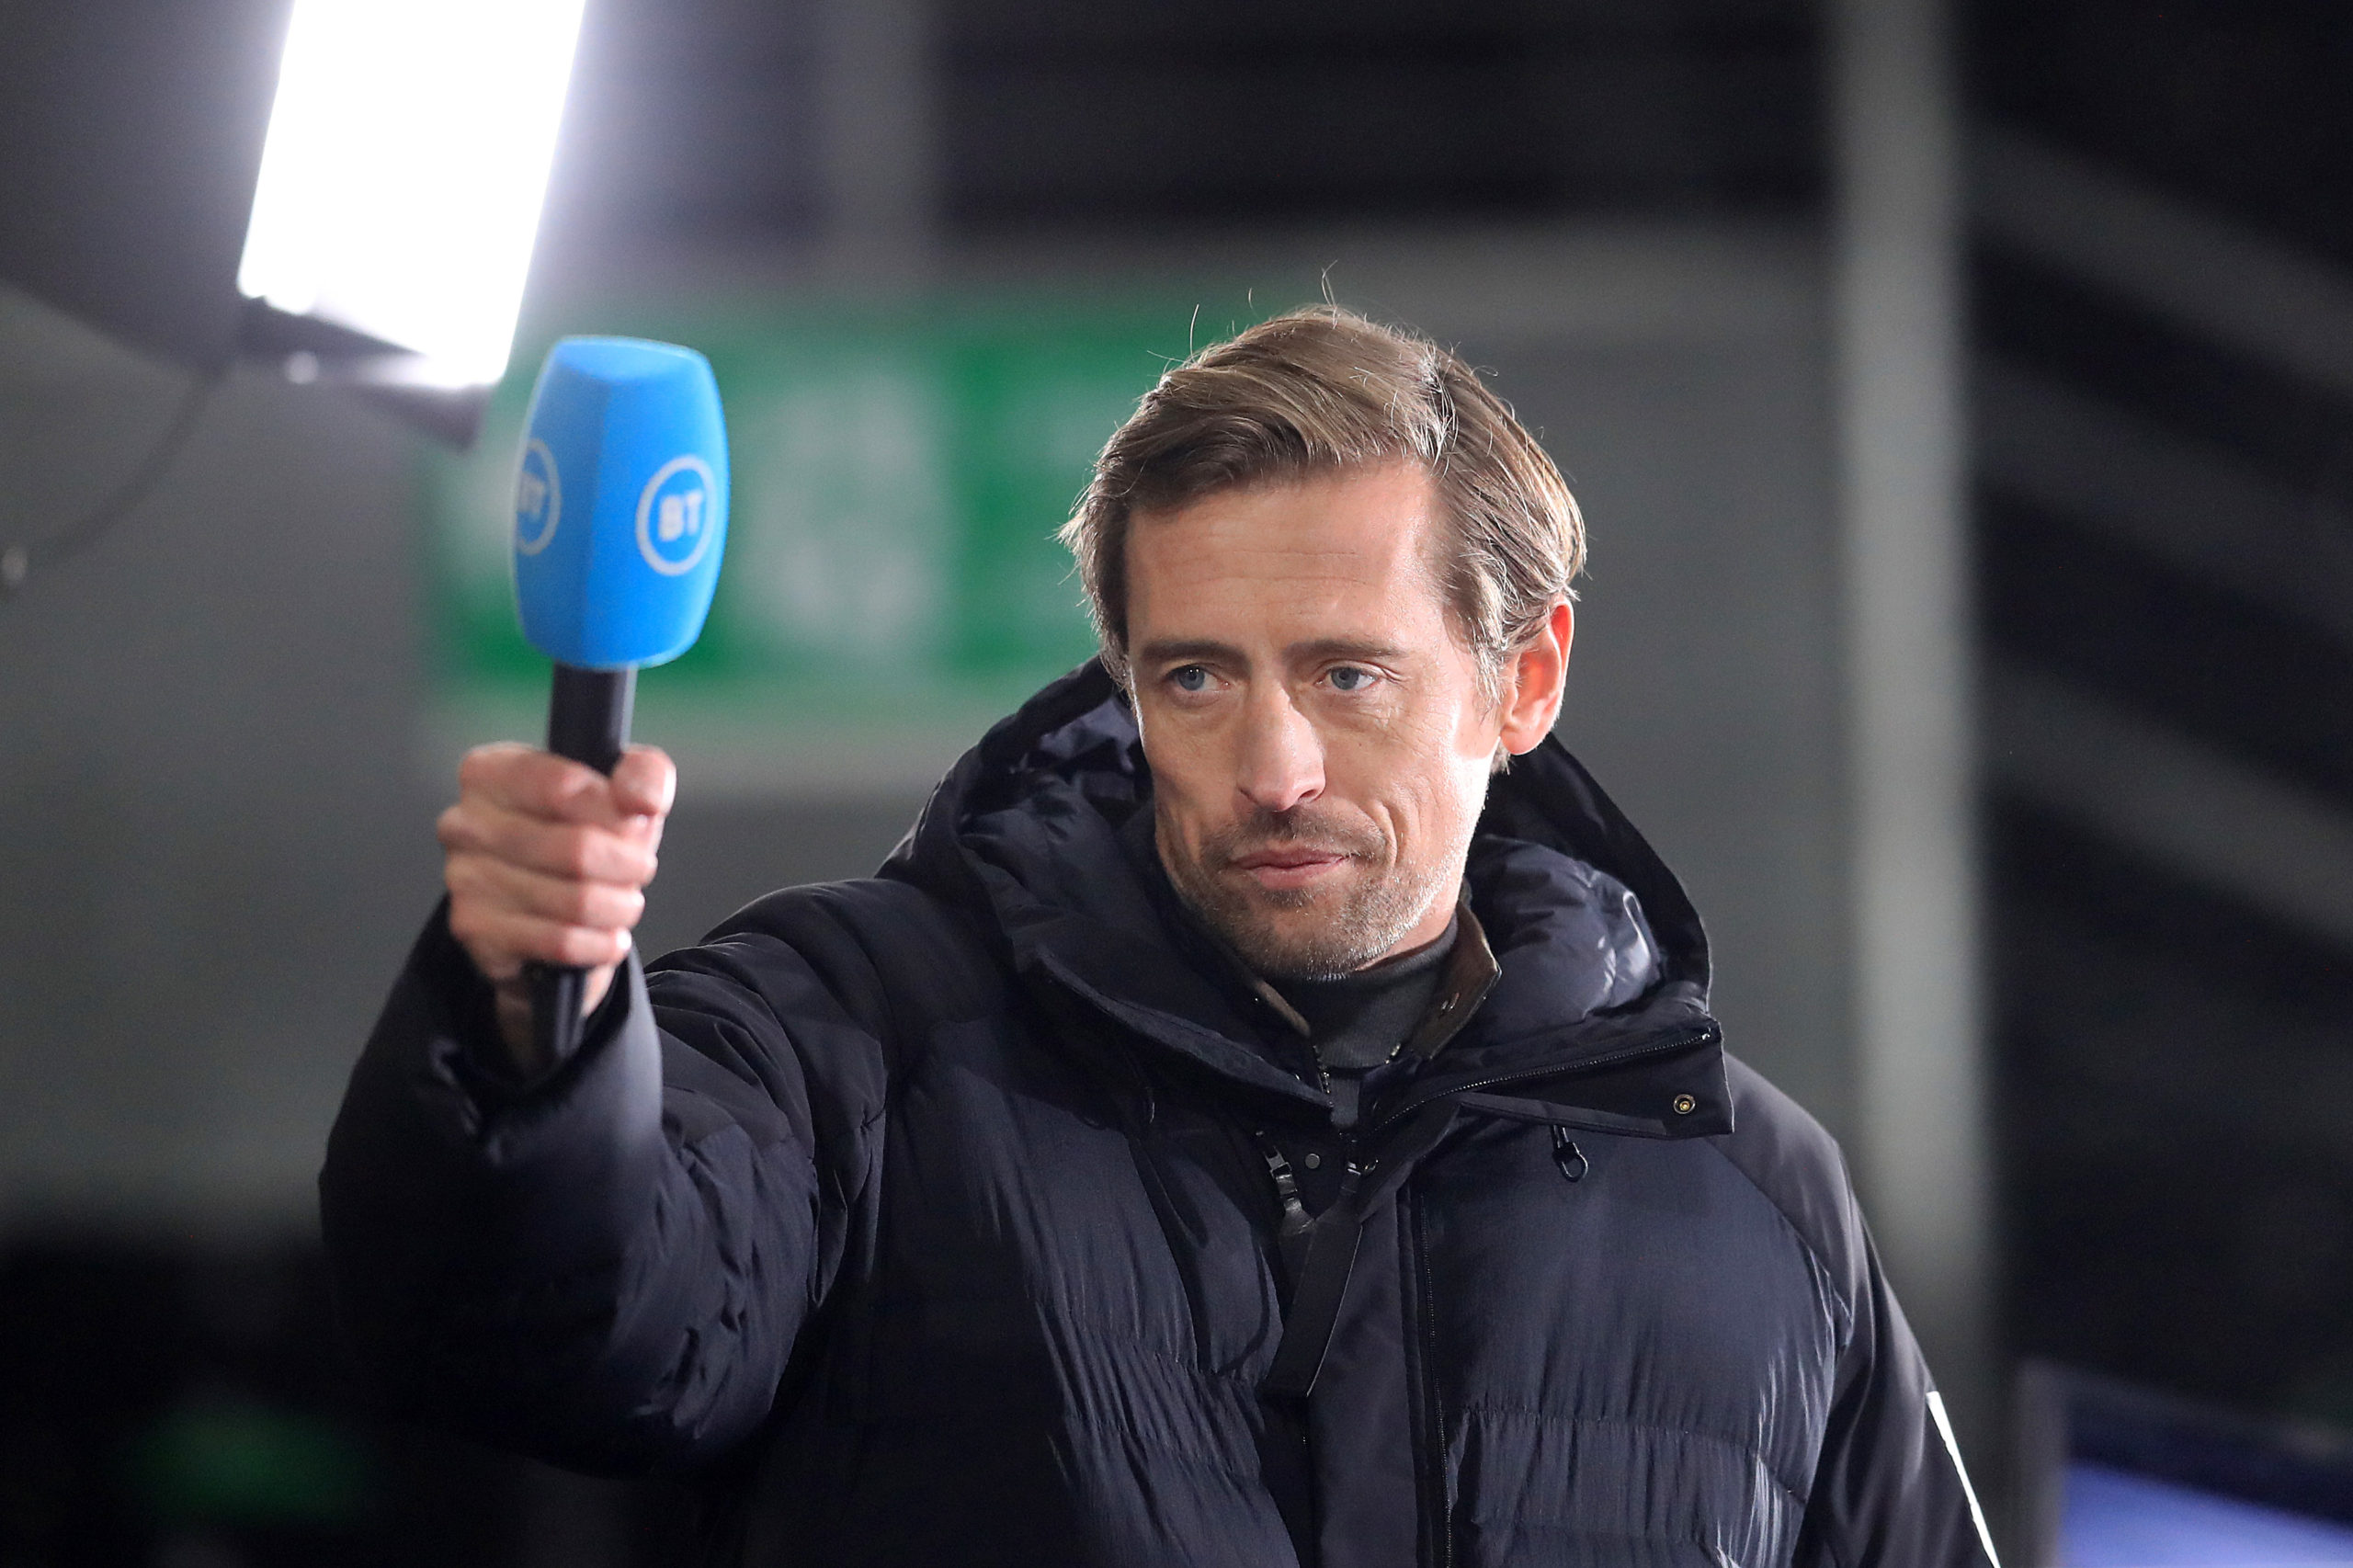 'A handful': Peter Crouch singles out impressive 20-year-old Chelsea loanee after latest display